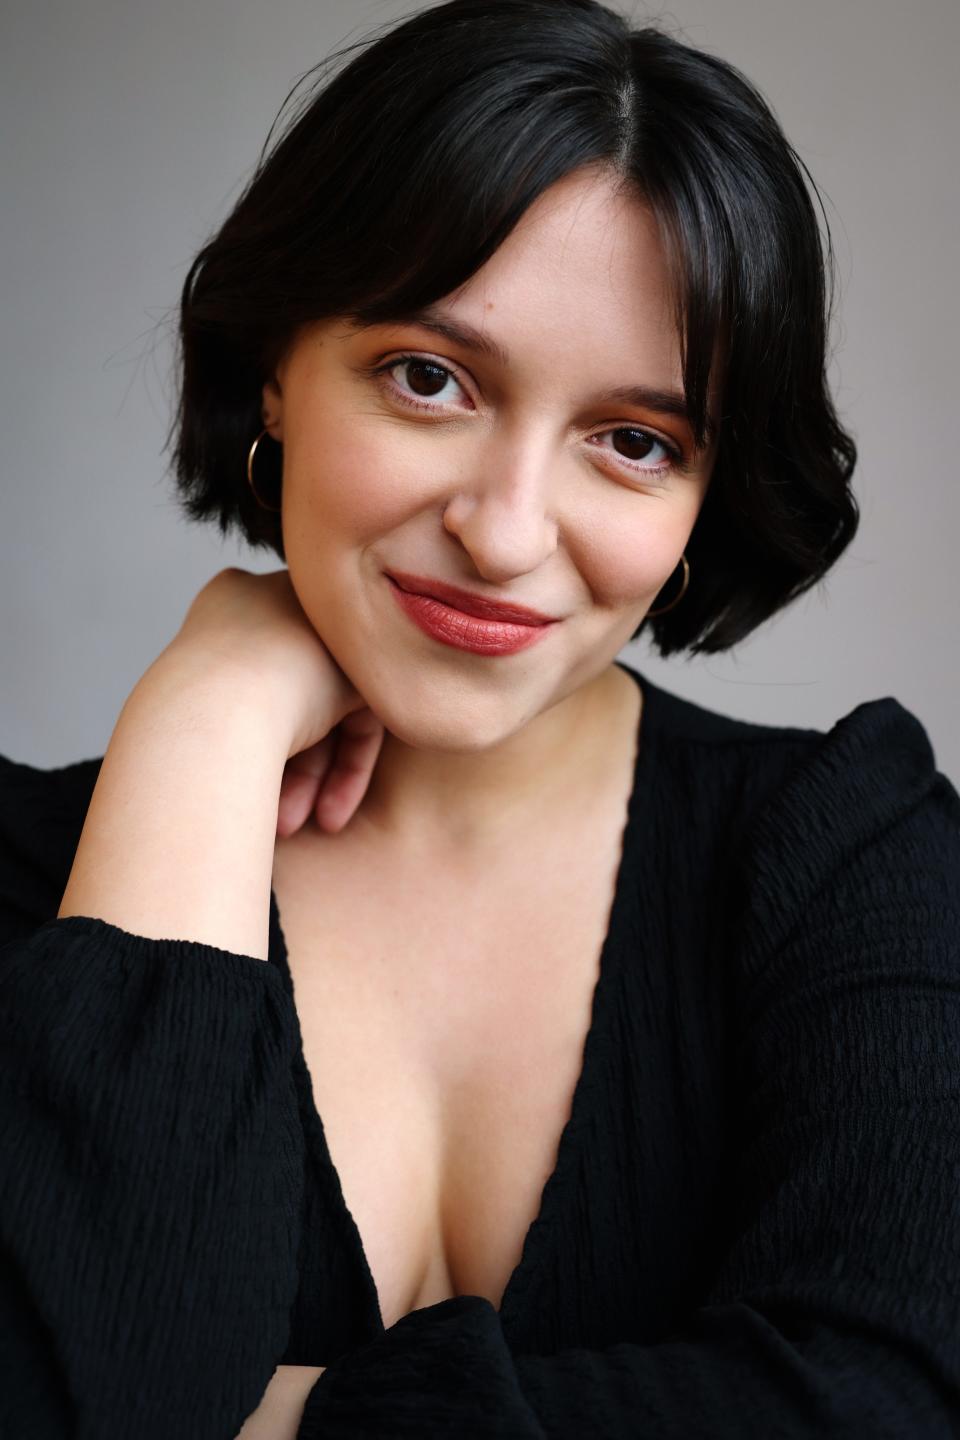 Katerina McCrimmon will play Fanny Brice in the national tour, her first major role.